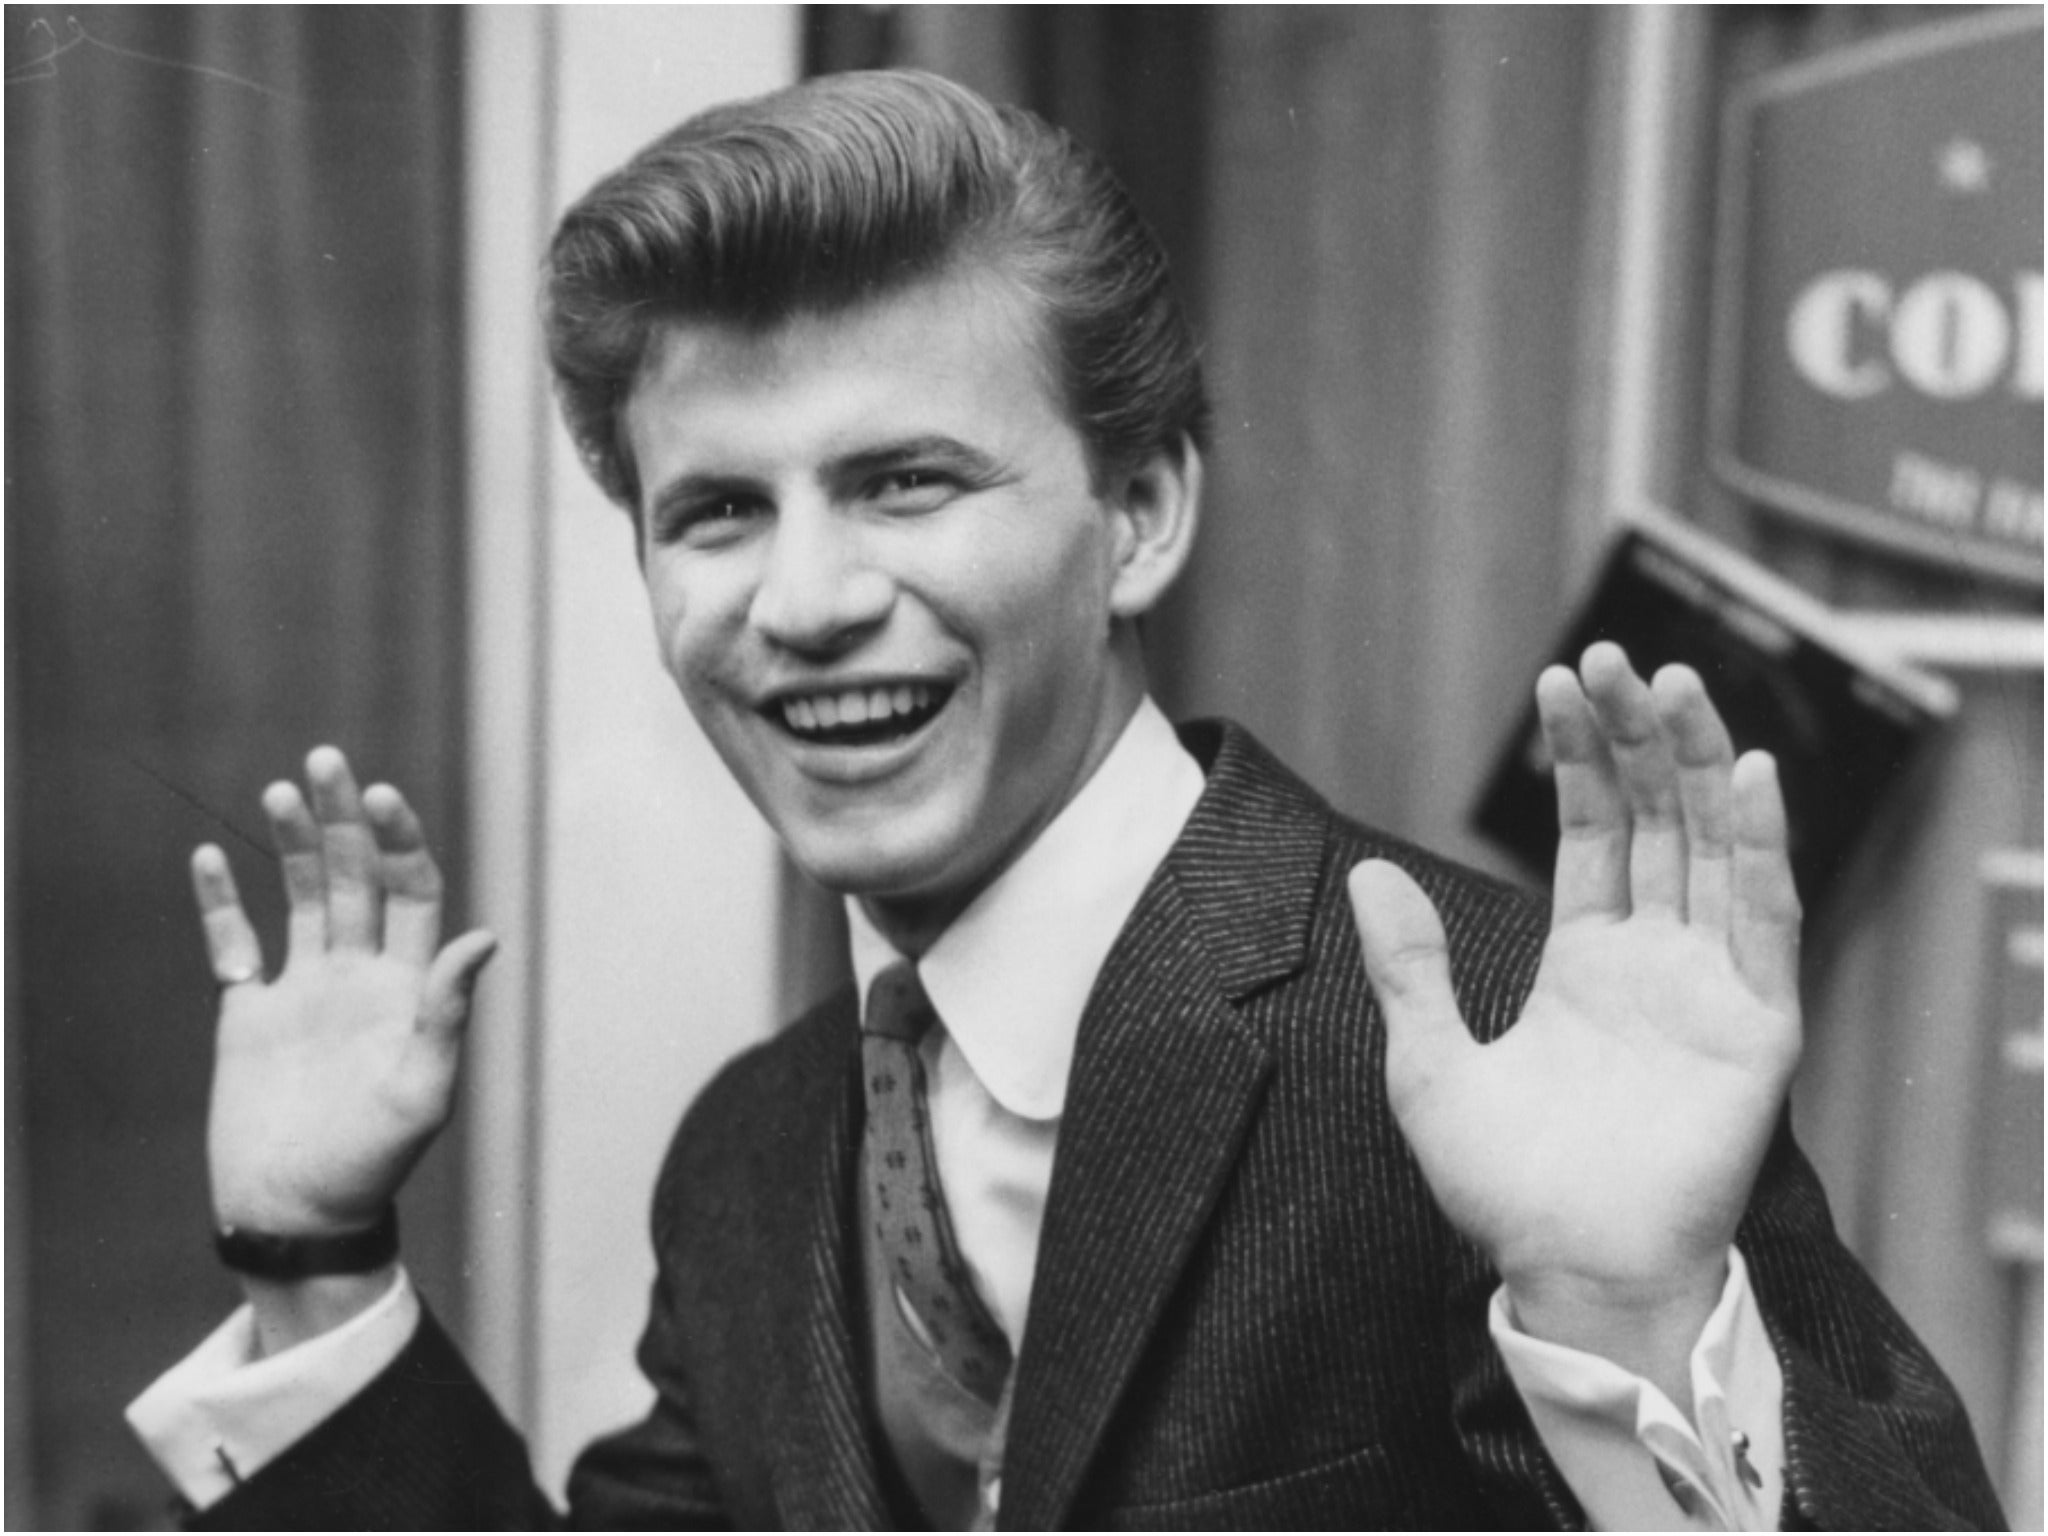 File photo: Bobby Rydell at a press reception in London on 17 February 1961